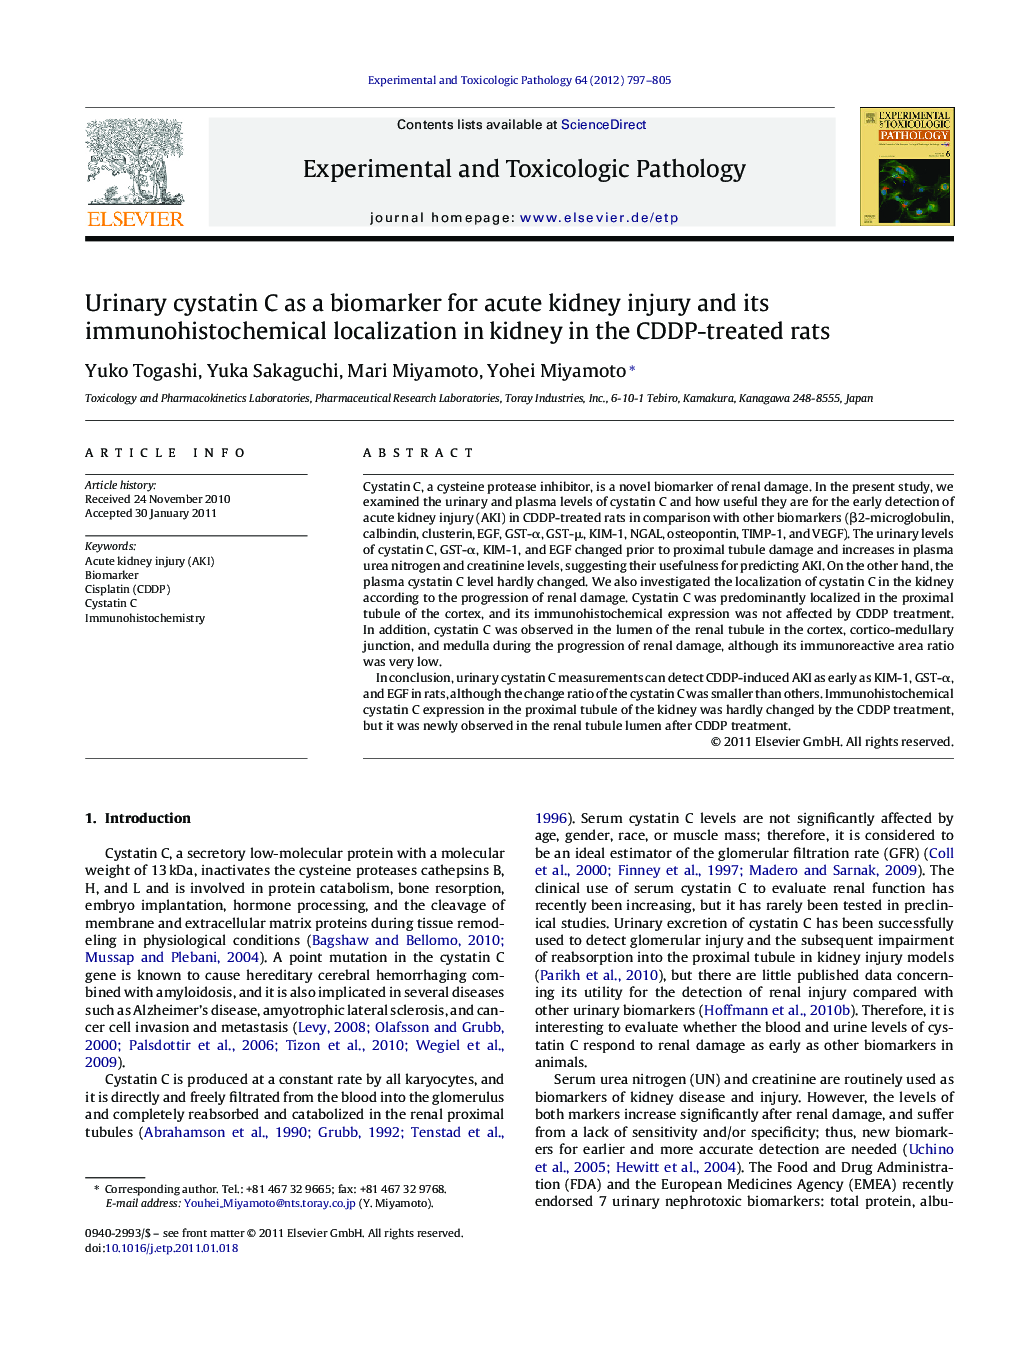 Urinary cystatin C as a biomarker for acute kidney injury and its immunohistochemical localization in kidney in the CDDP-treated rats